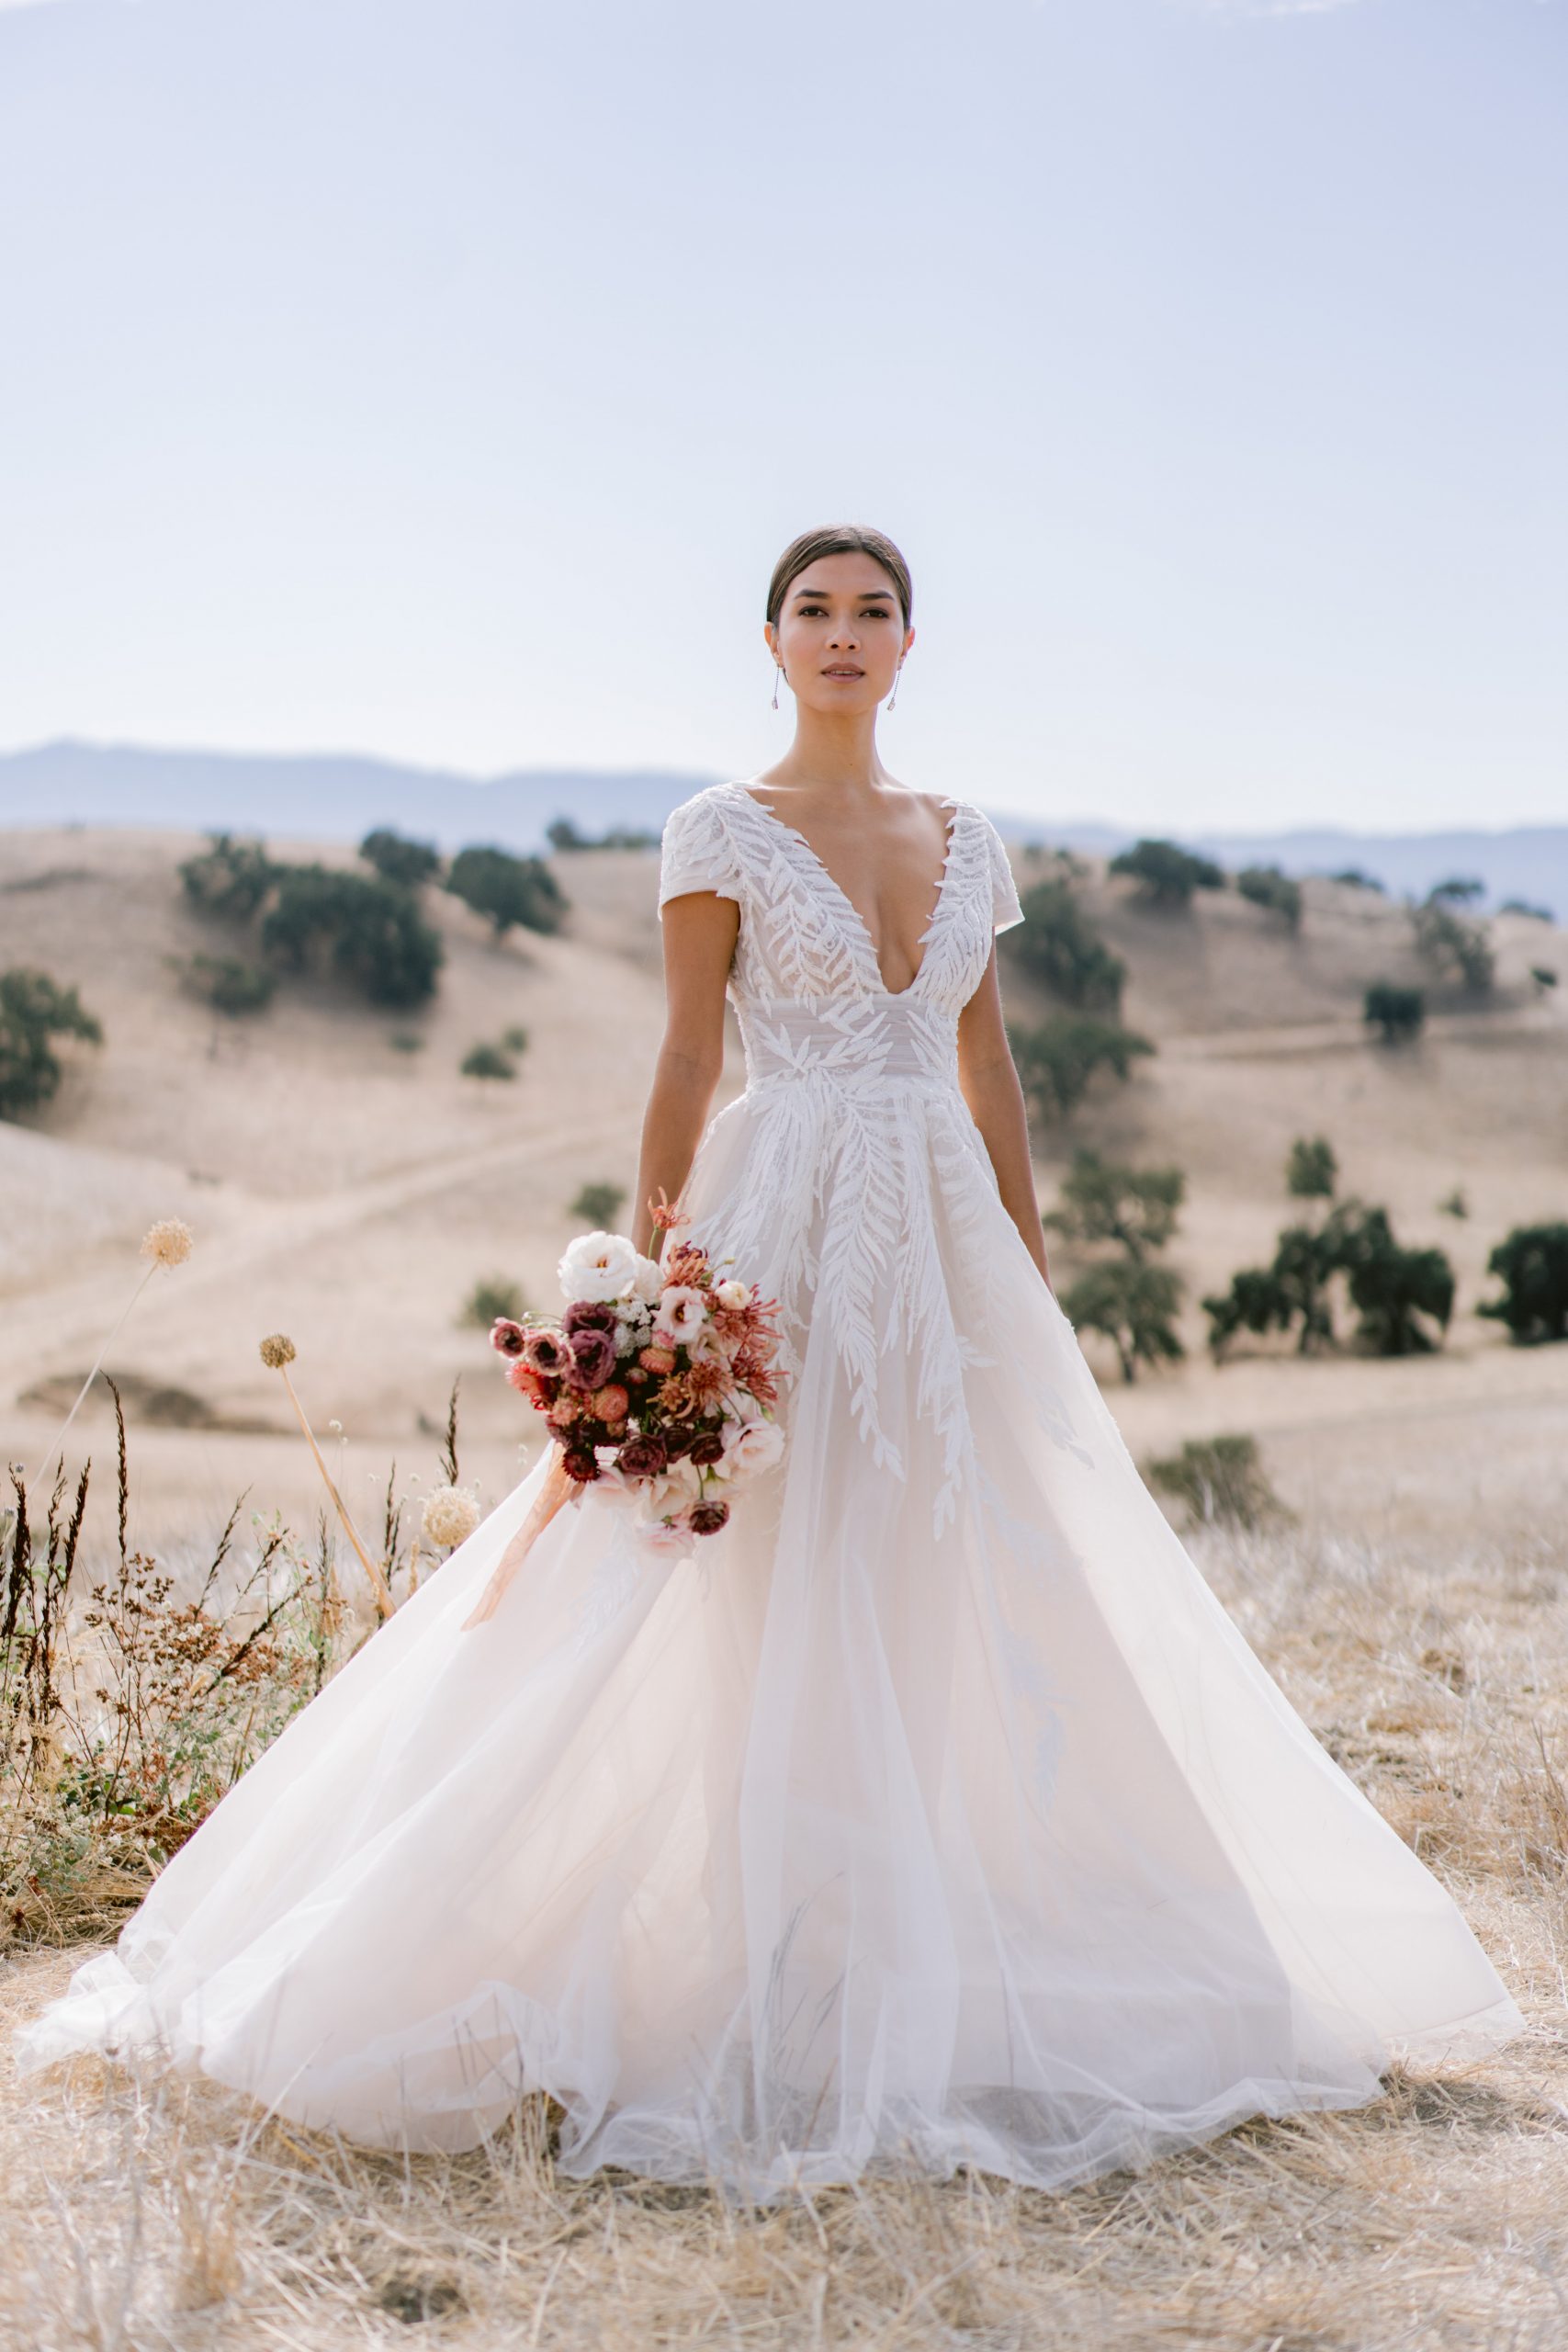 How to find your perfect dress according to your body shape – Bridalstar